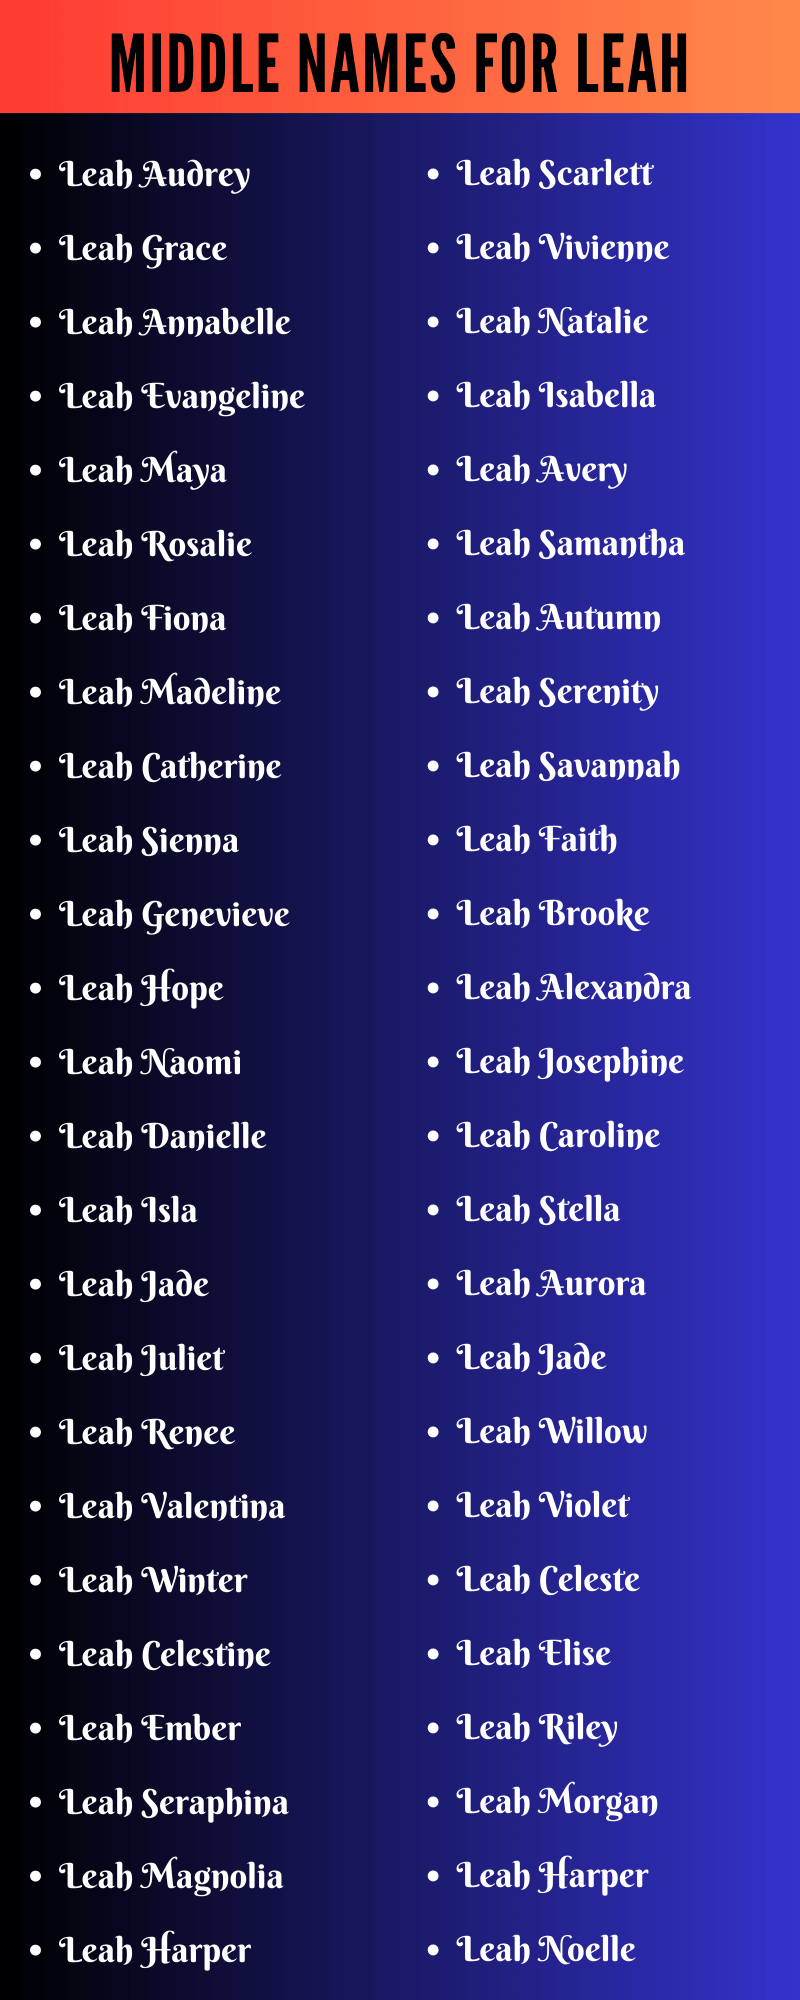 Middle Names For Leah